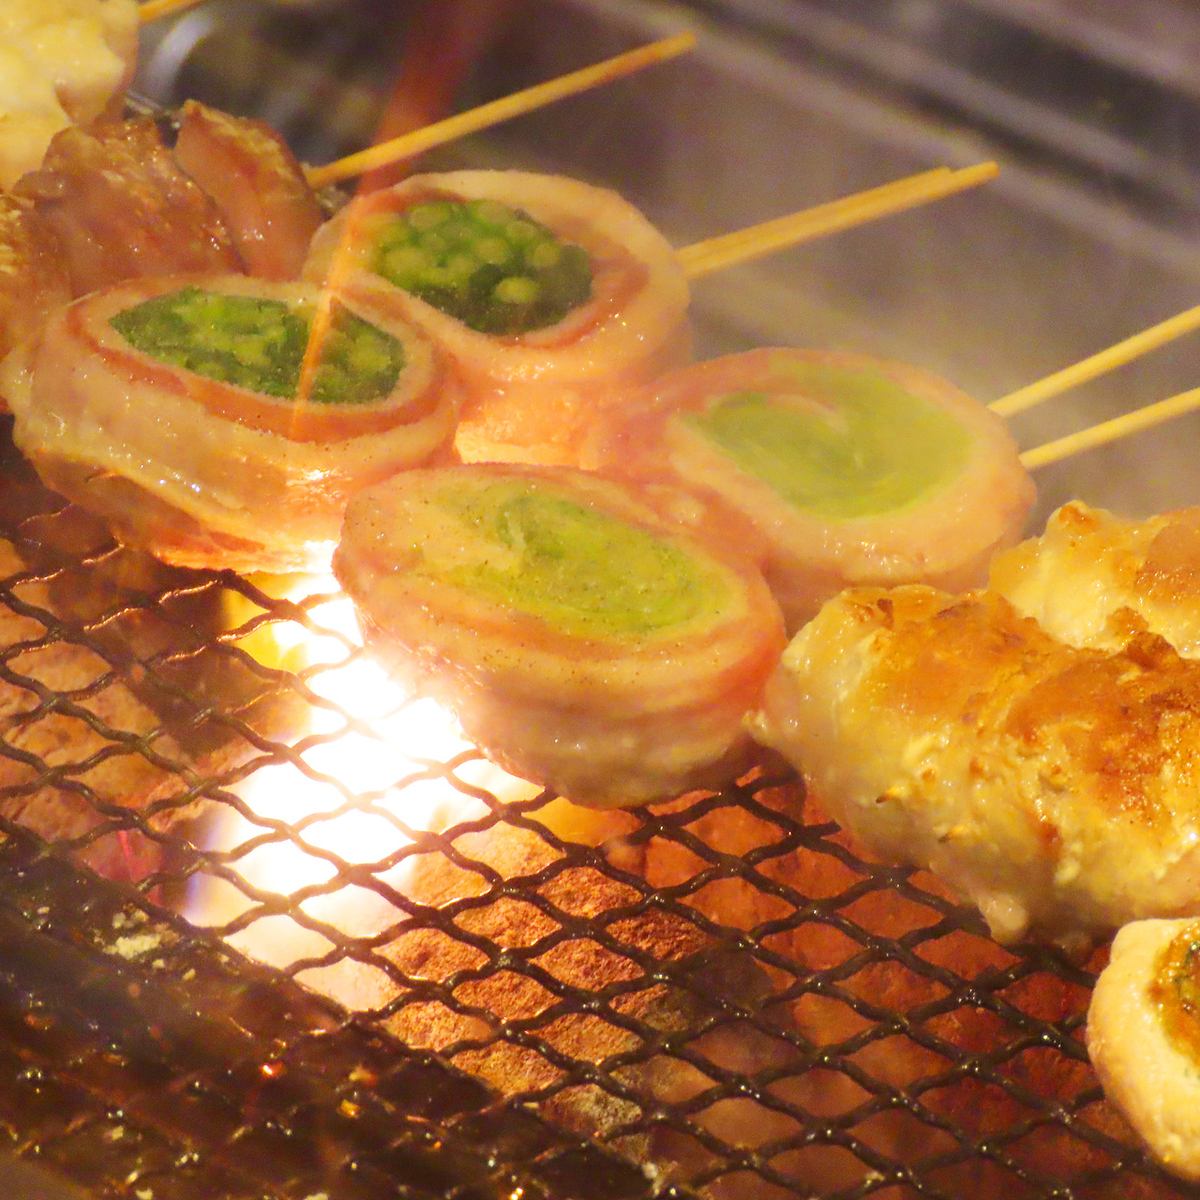 We recommend the yakitori, which has a variety of cuts, from standard to rare cuts!